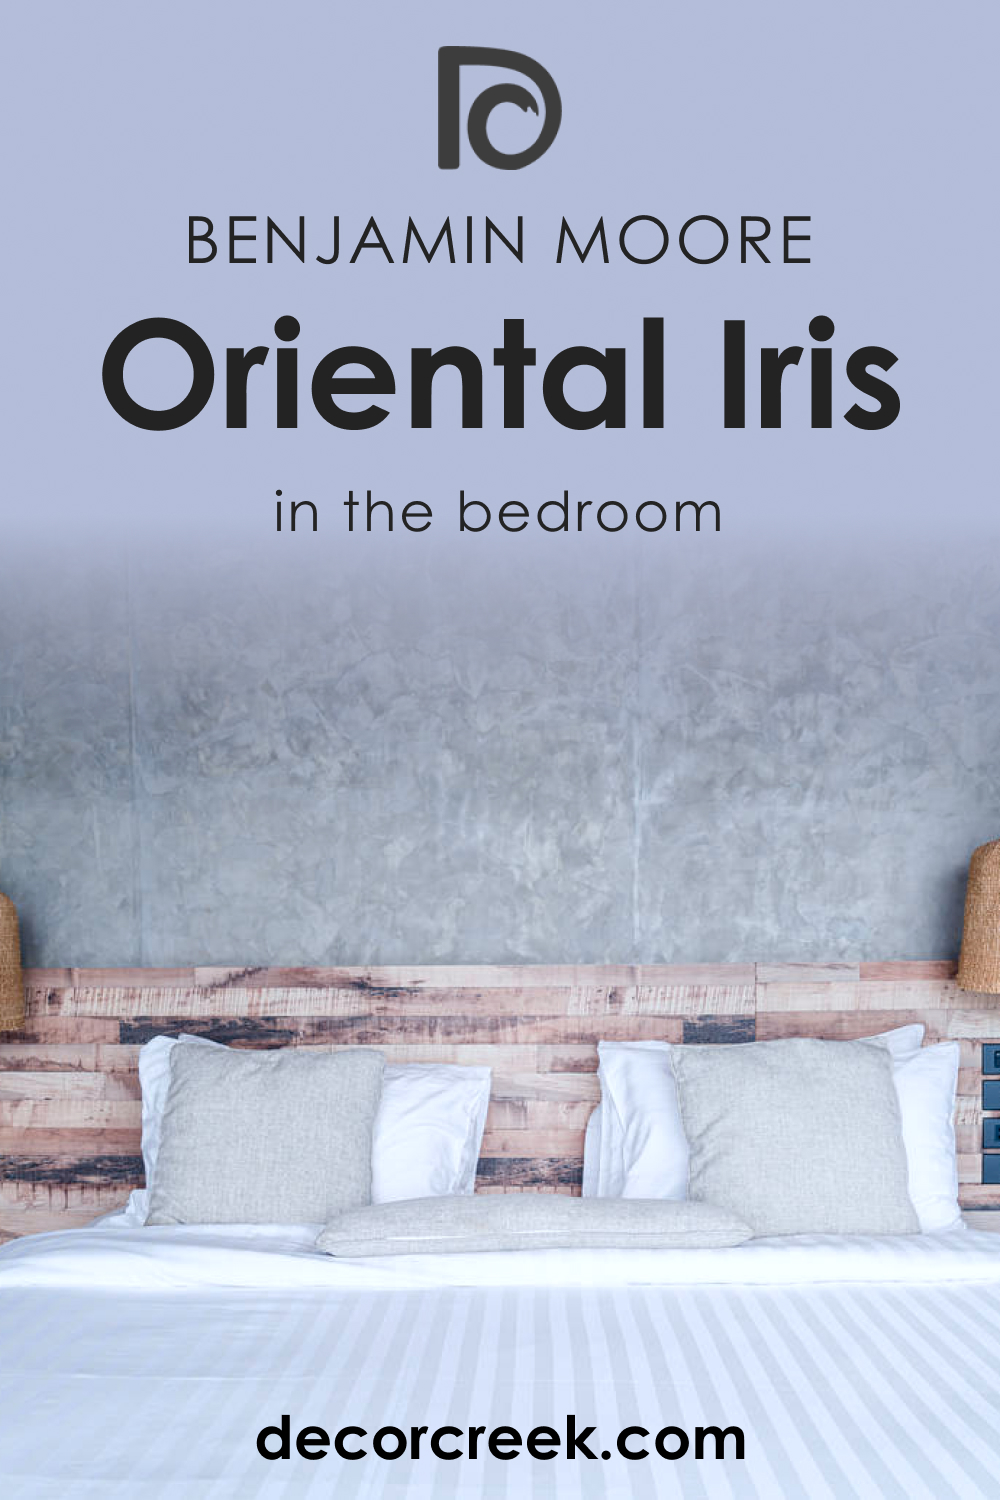 How to Use Oriental Iris 1418 in the Bedroom?